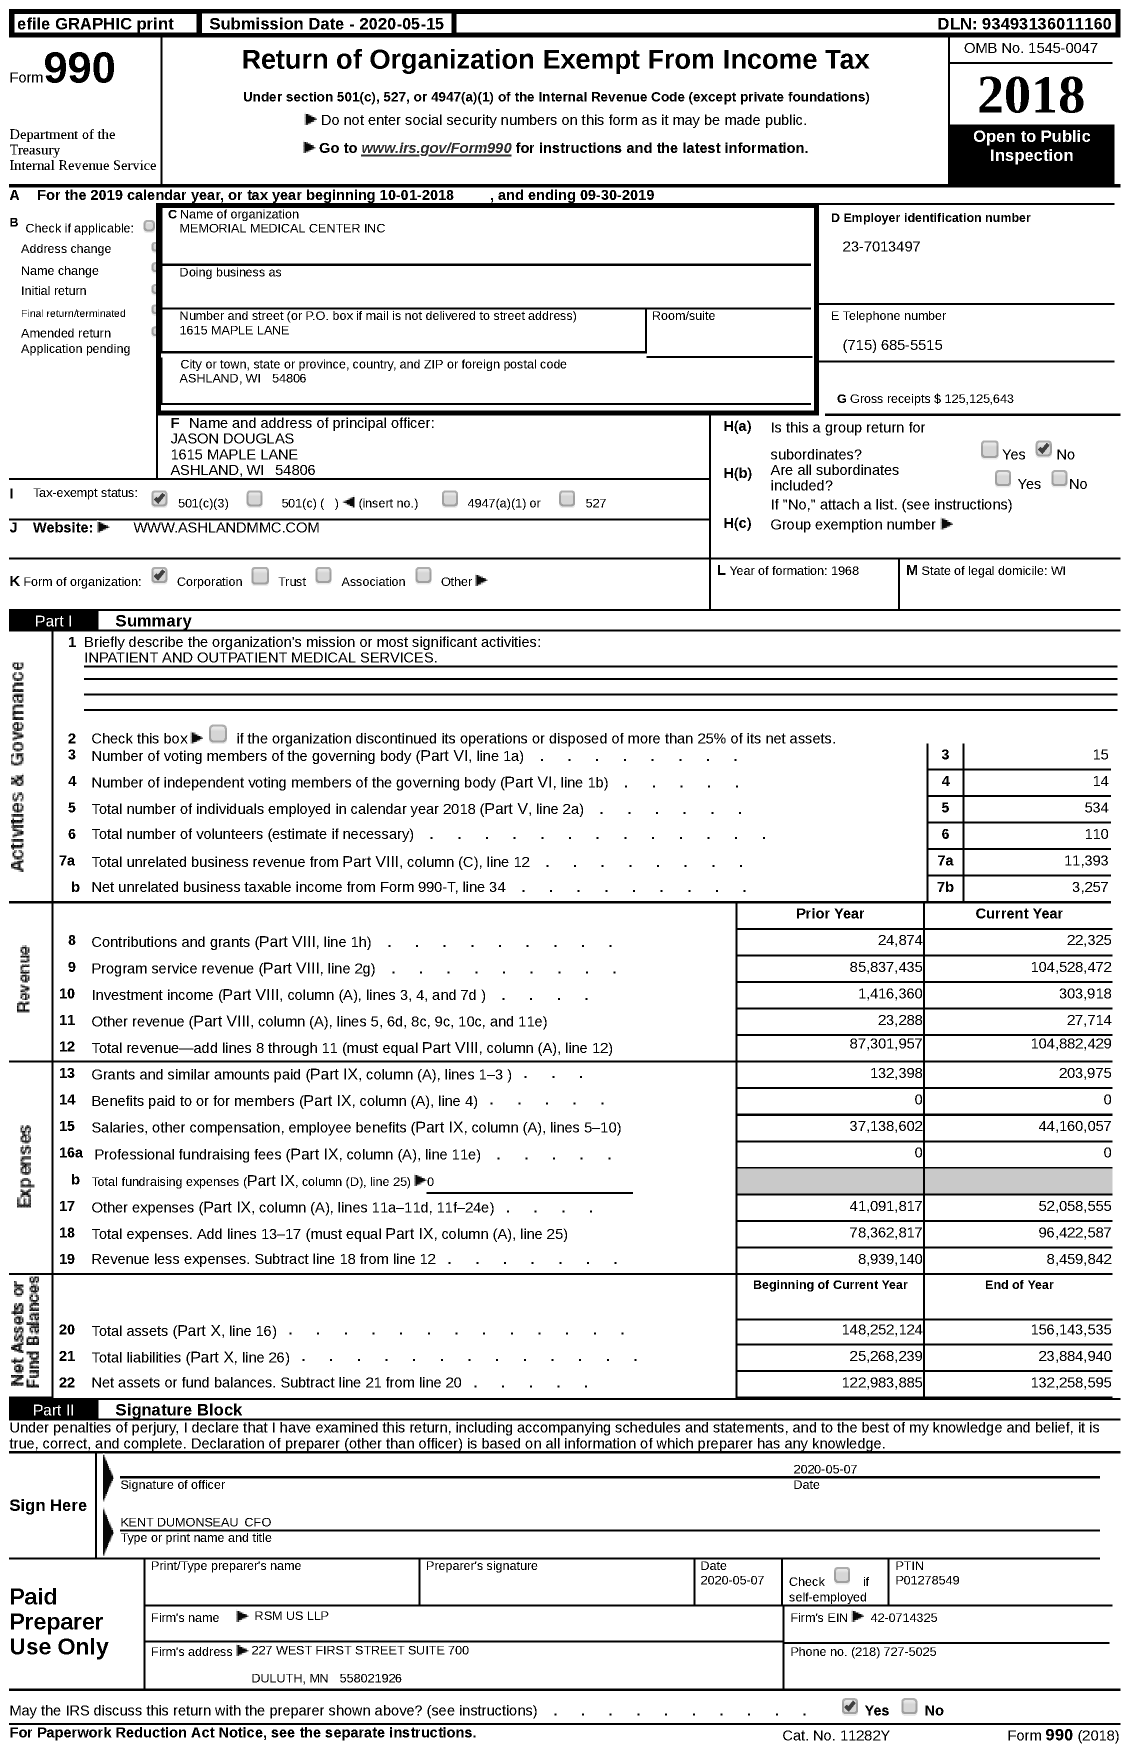 Image of first page of 2018 Form 990 for Memorial Medical Center (MMC)